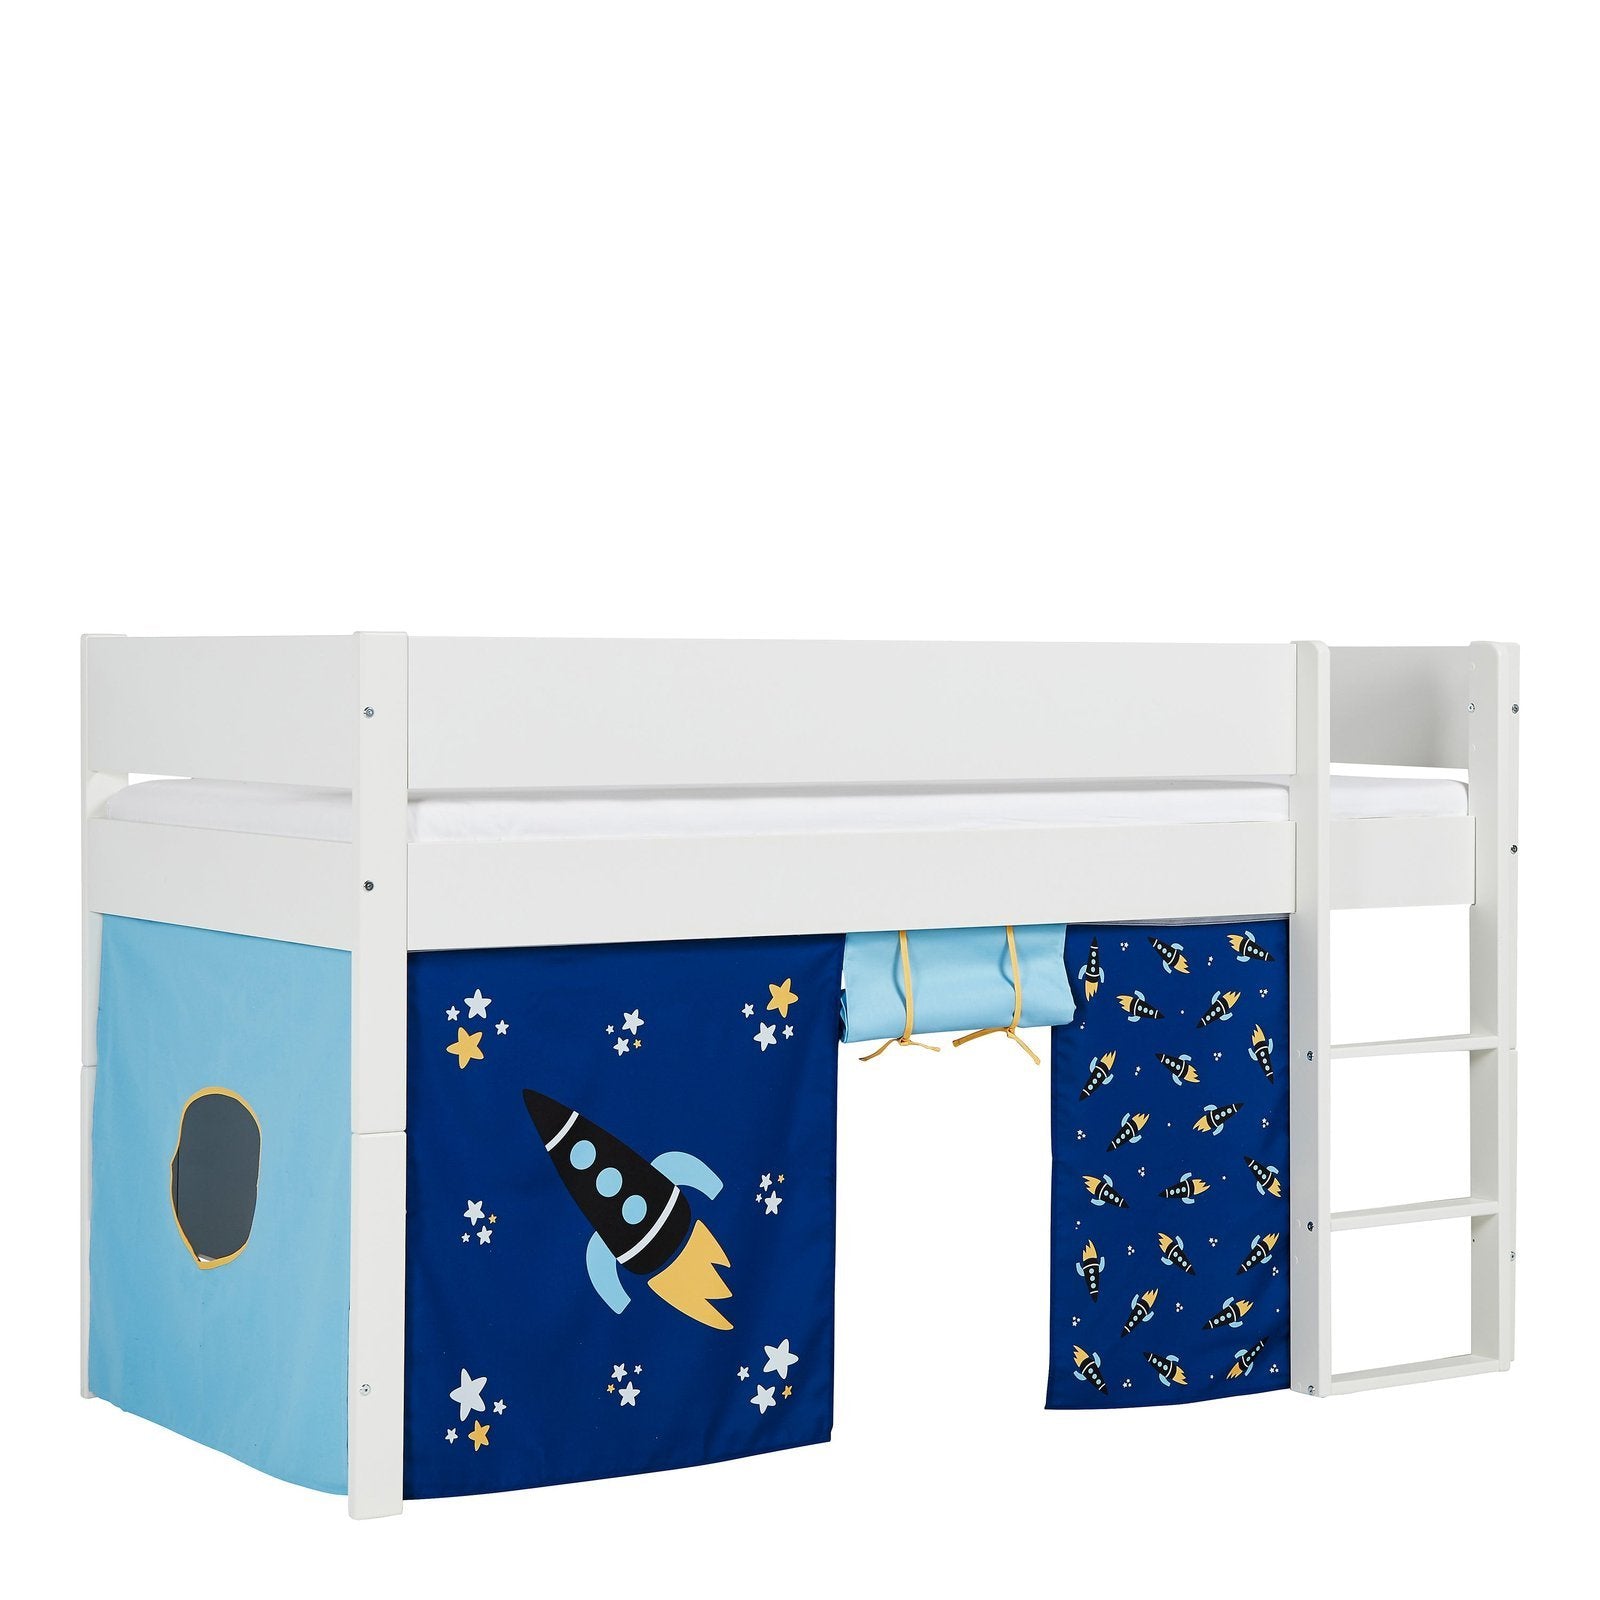 Huxie White Mid Sleeper with Safety Rail